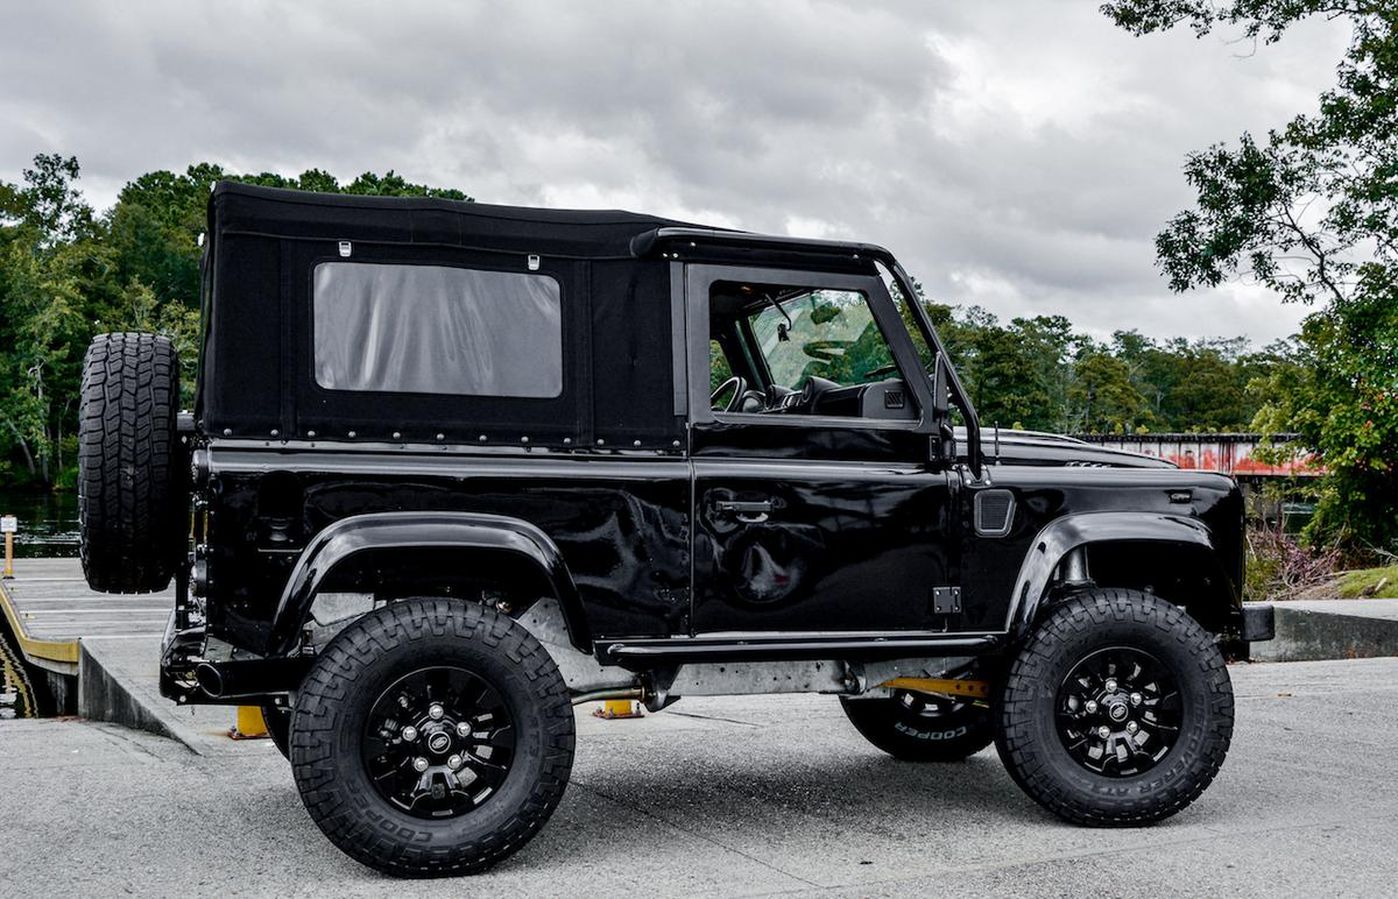 Osprey's Latest Land Rover Defender 90 Is Ready To Tackle Any Terrain